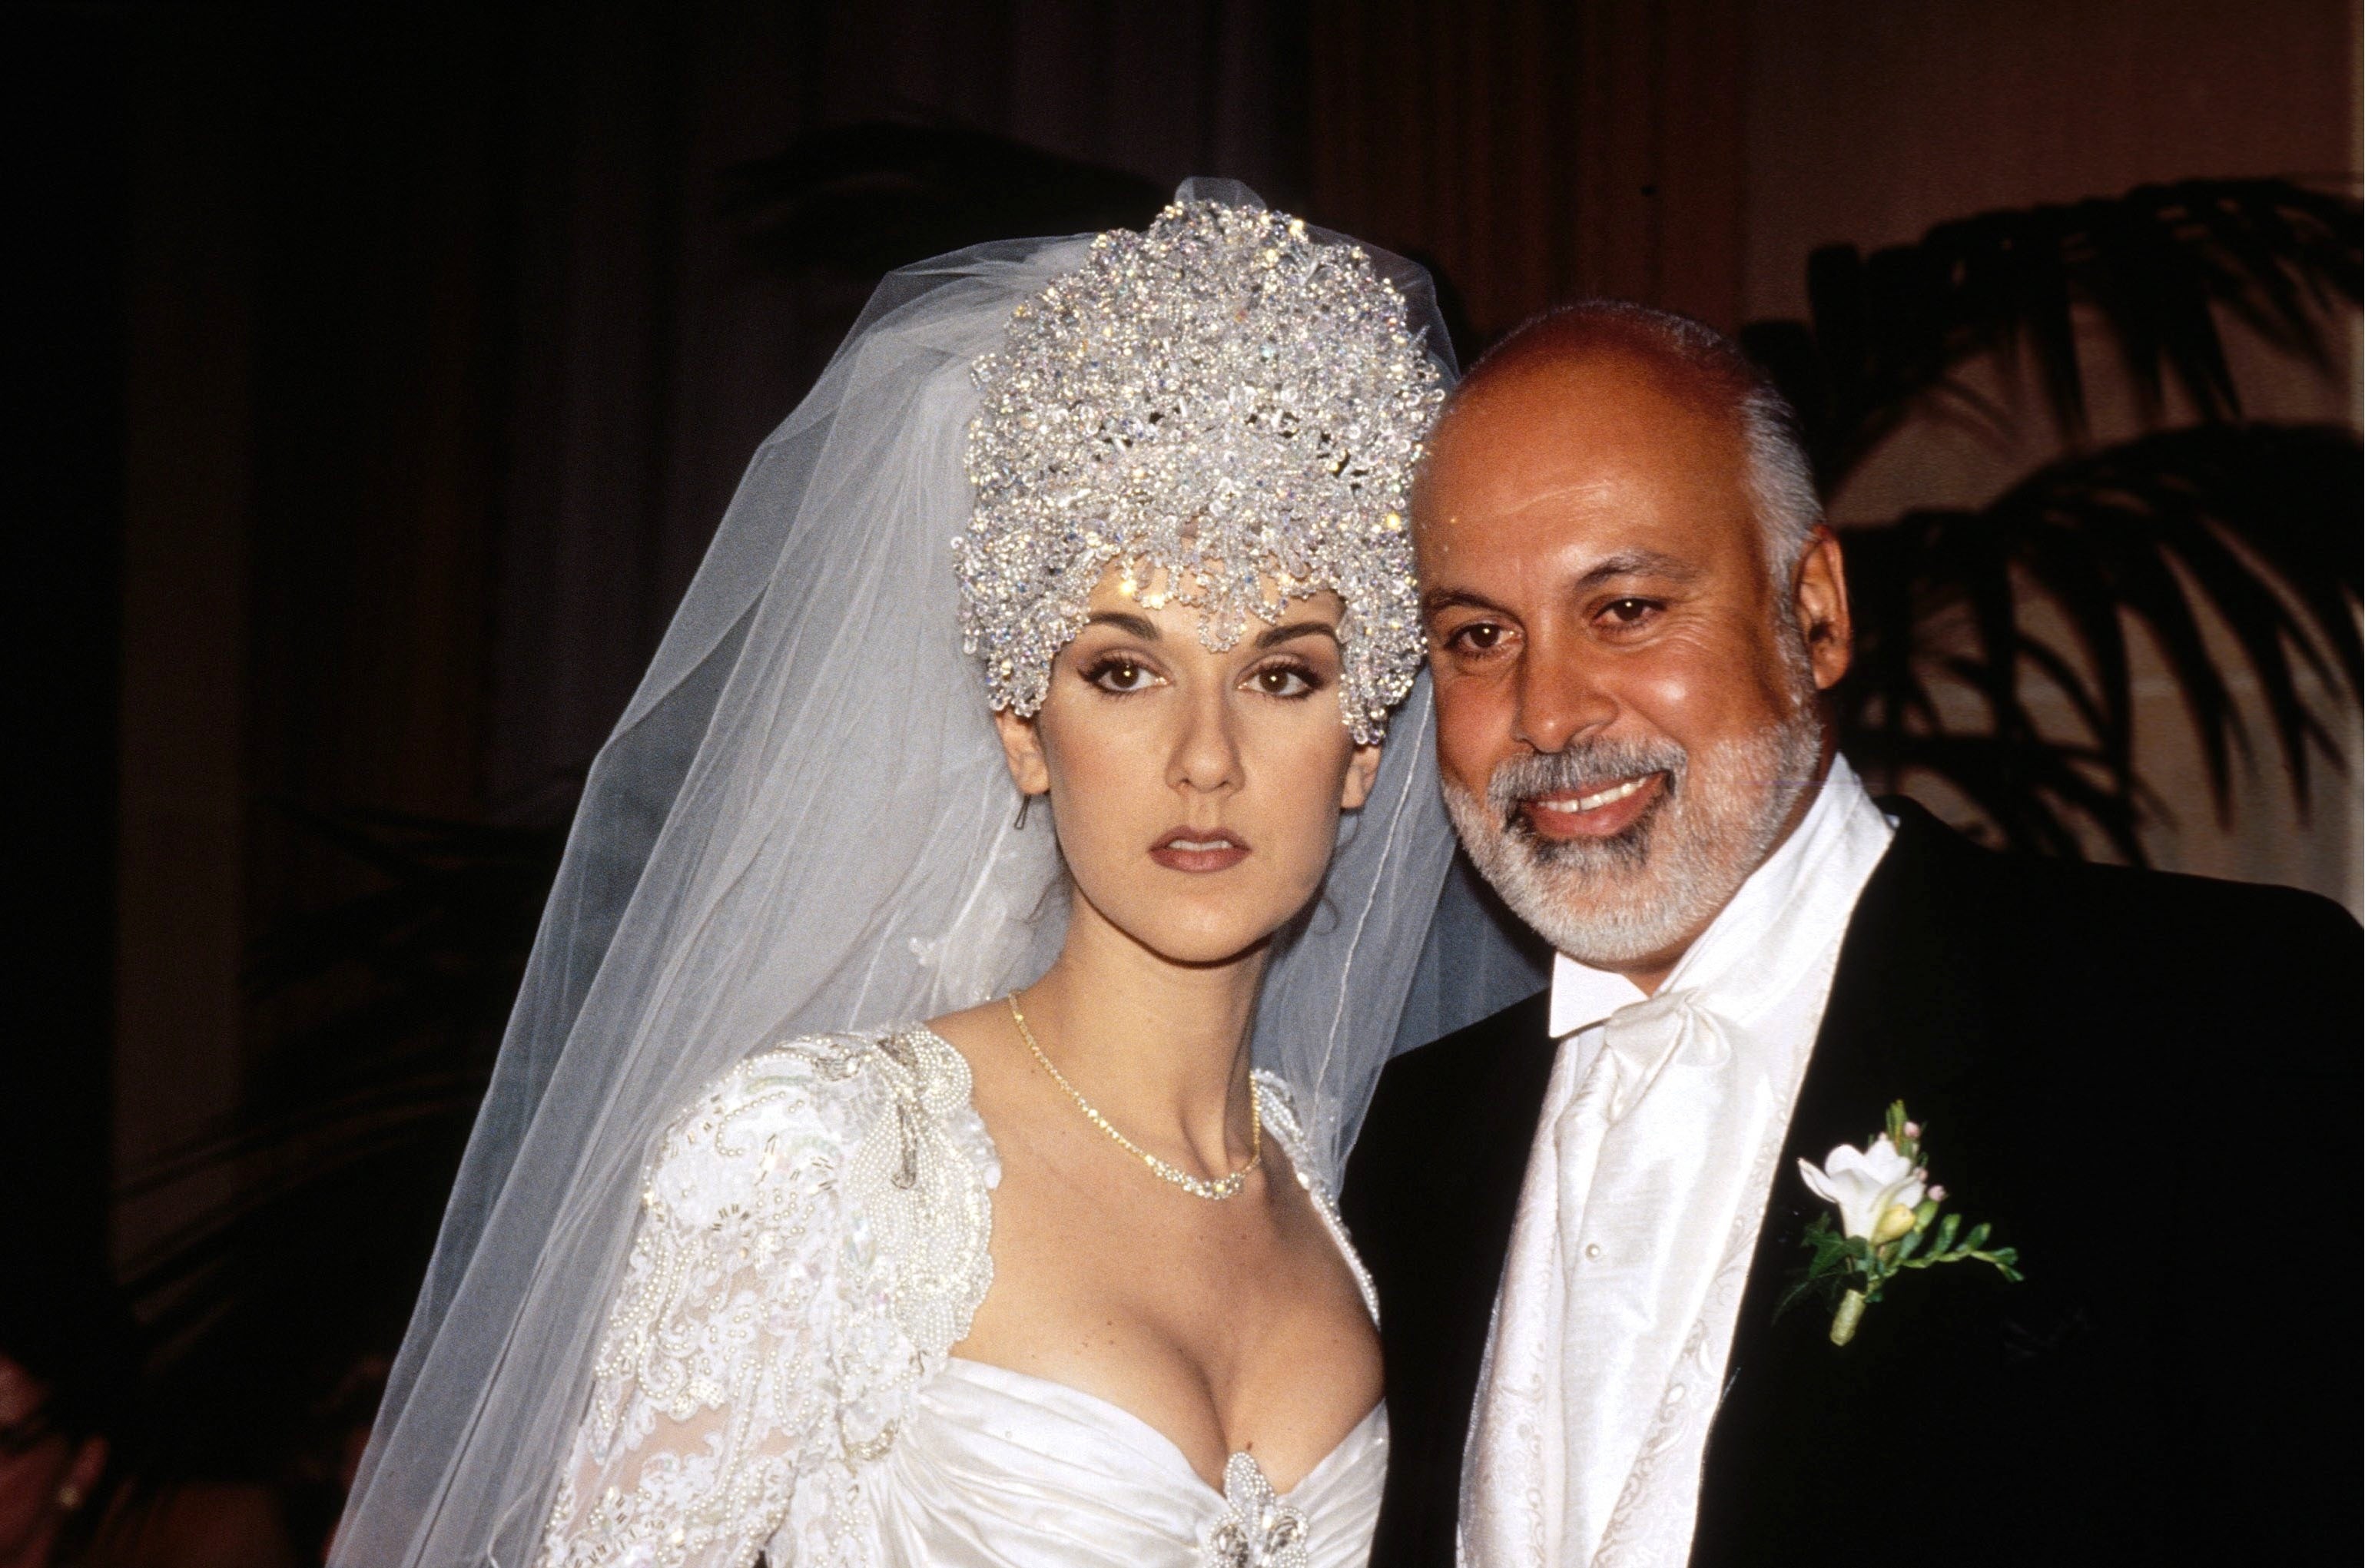 Celine Dion and husband René Angélil on their wedding day in December 1994